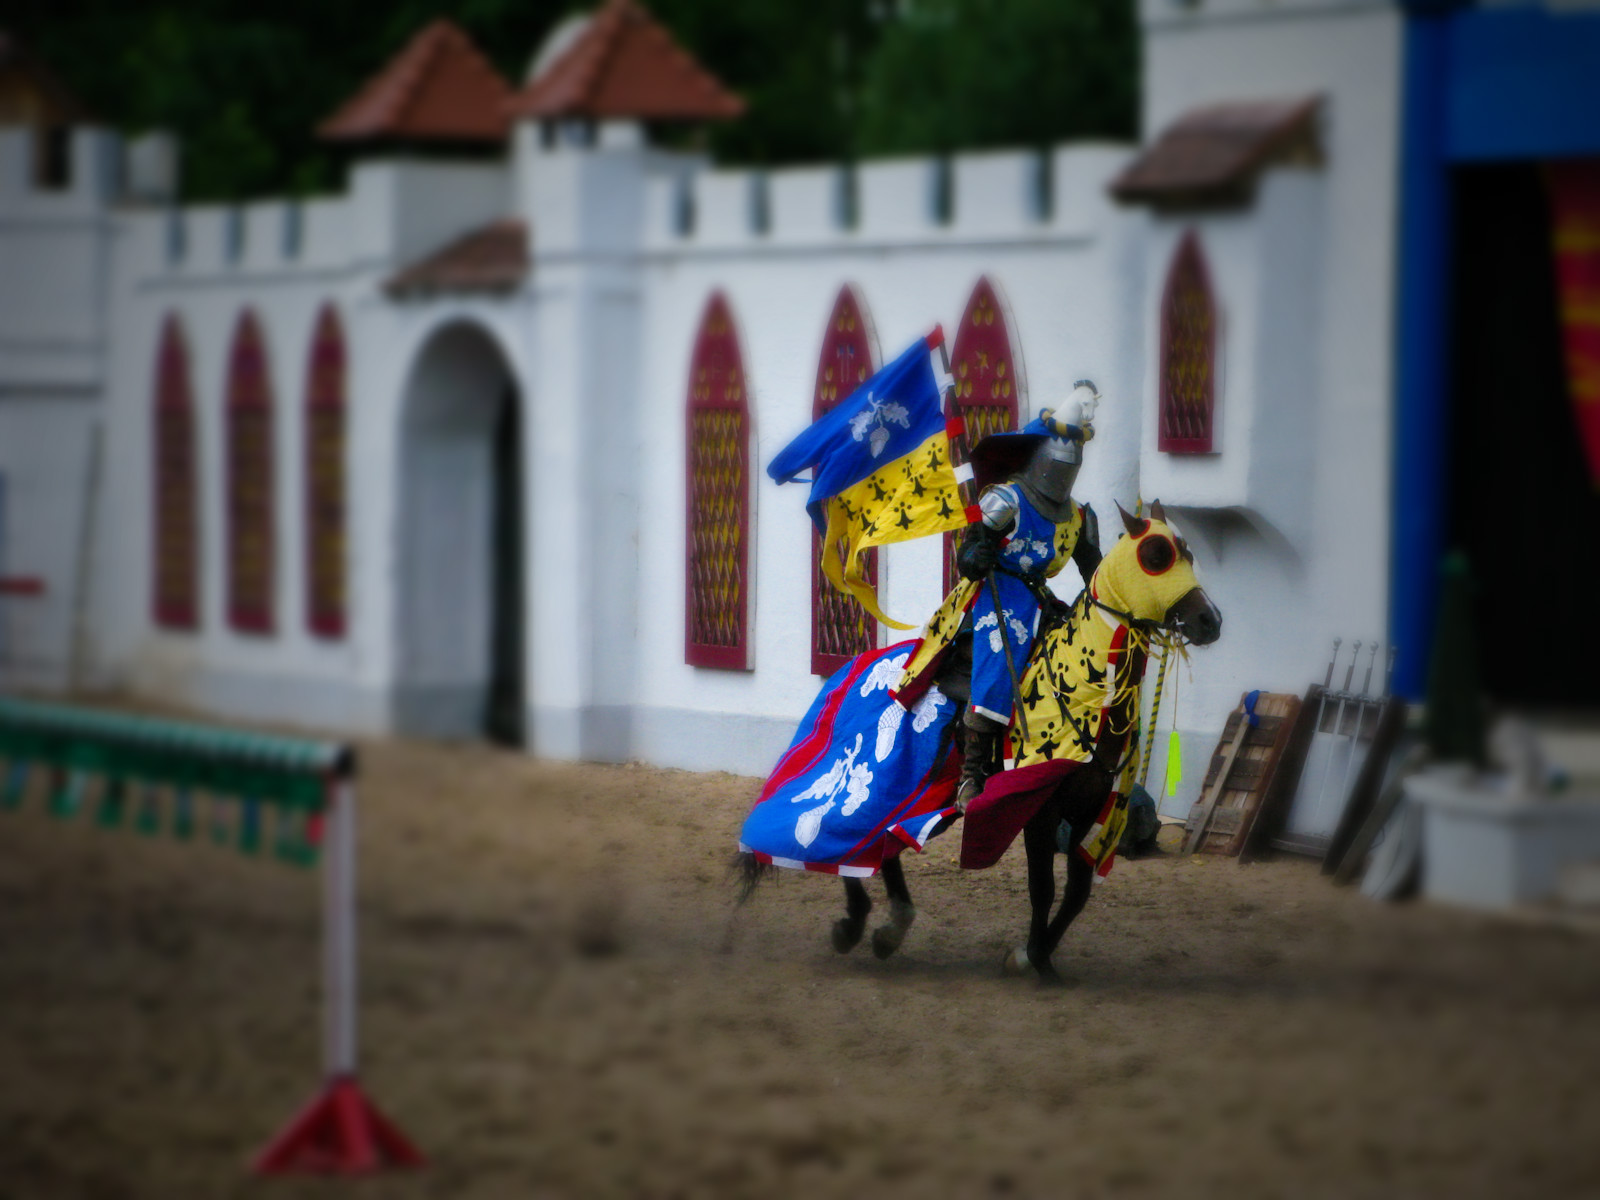 two men riding horses holding colorful flags on a dirt ground